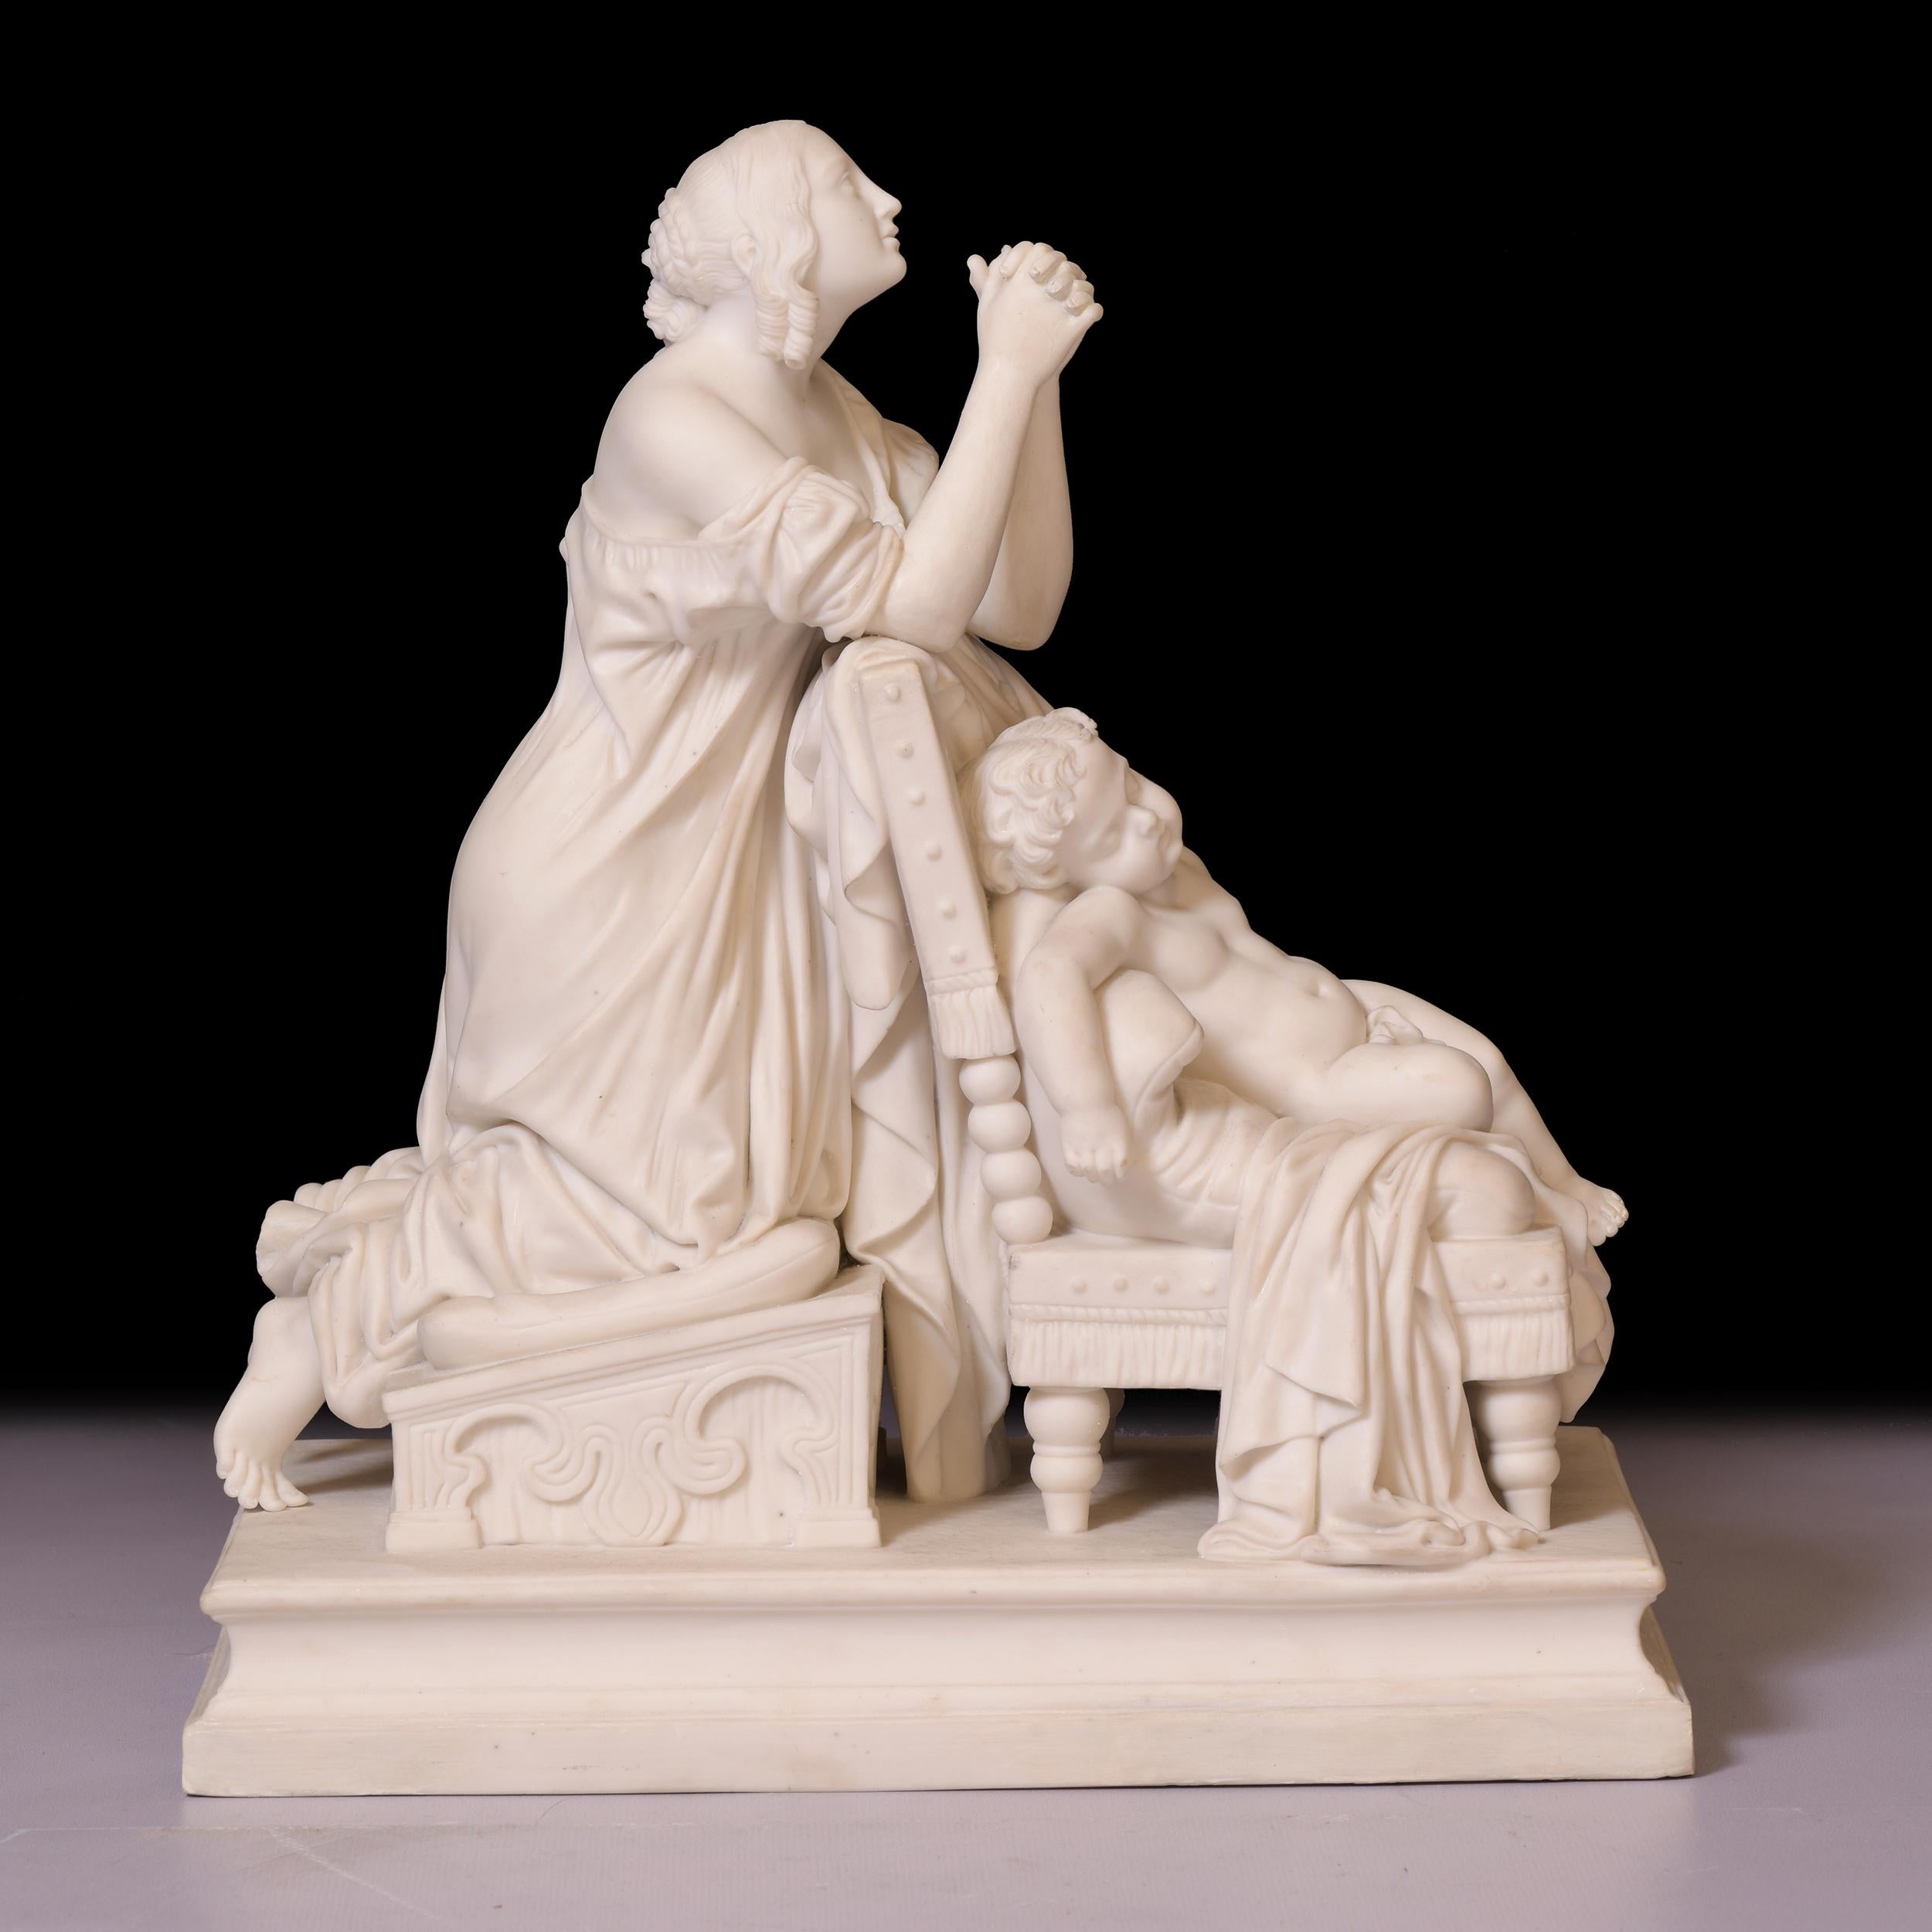 A very fine parian group of Mother and child, modeled as a mother praying over her sleeping child.

Circa 1860

English

Footnote:

Minton ware, cream-coloured and blue-printed earthenware maiolica, bone china, and Parian porcelain produced at a